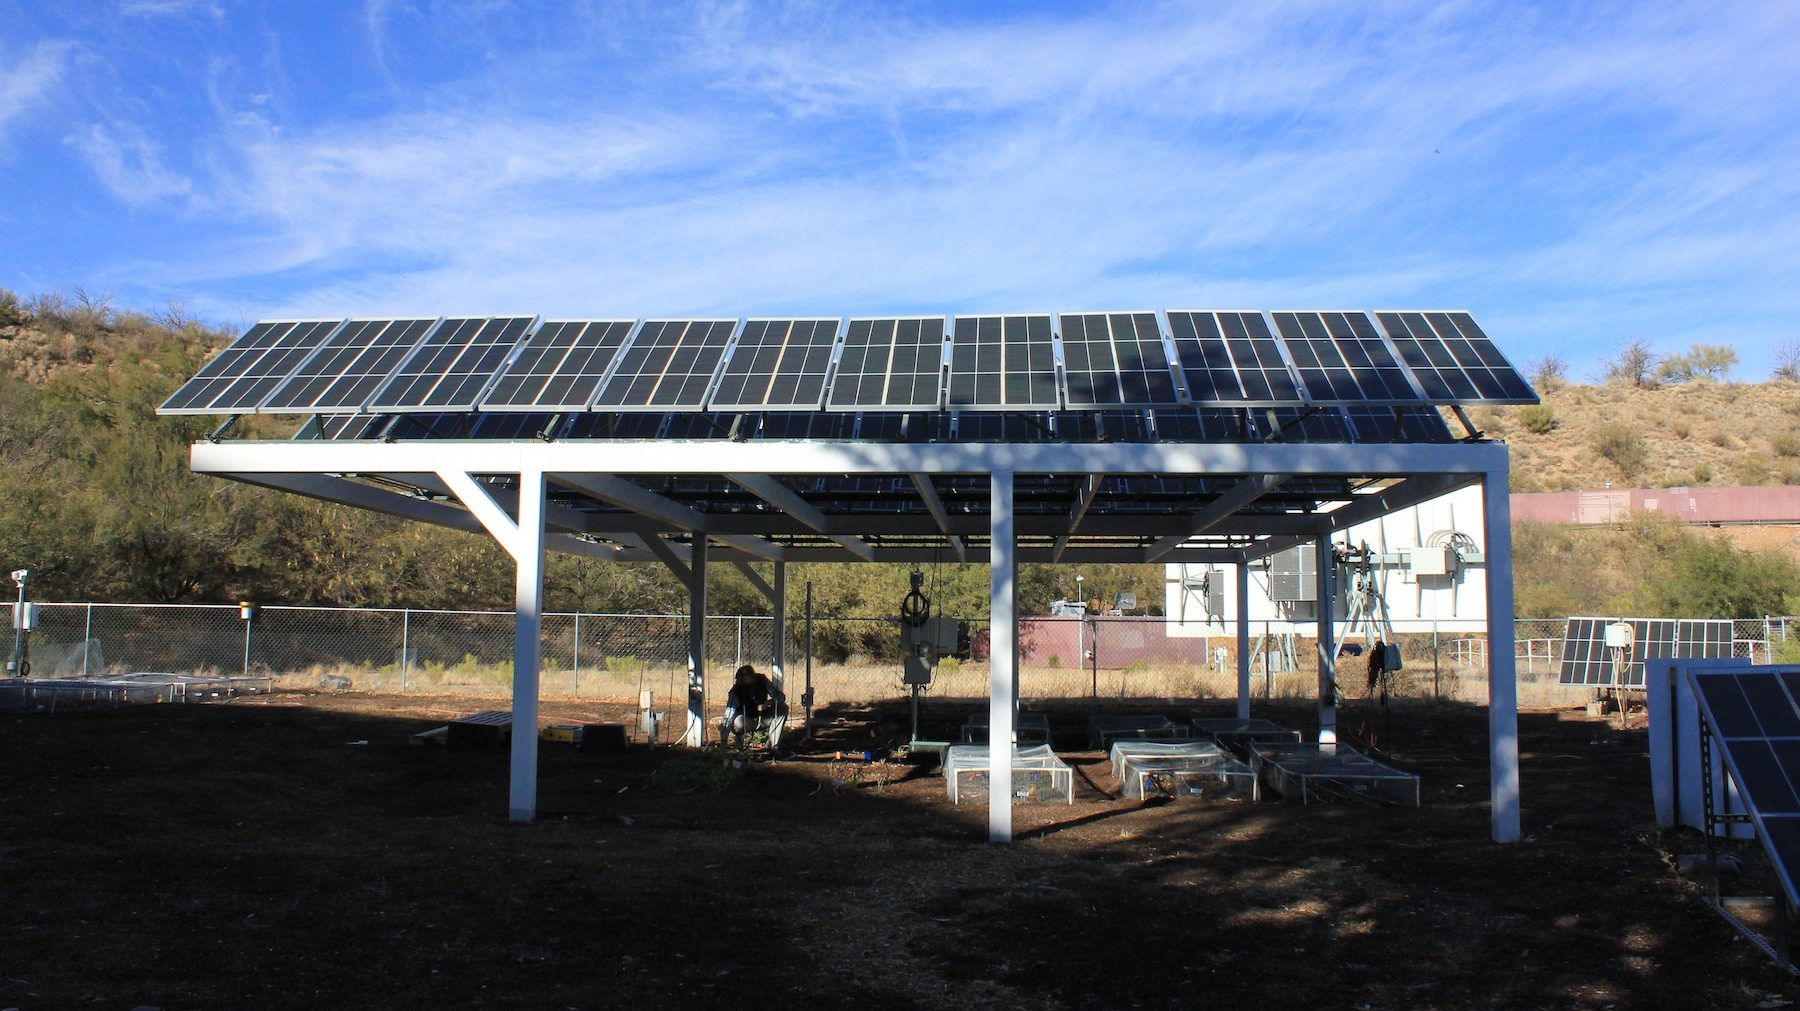 An experimental garden plot at the University of Arizona's Biosphere 2 complex. In agrivoltaic systems, the partial shade created by solar panels can benefit some crops in some climates.